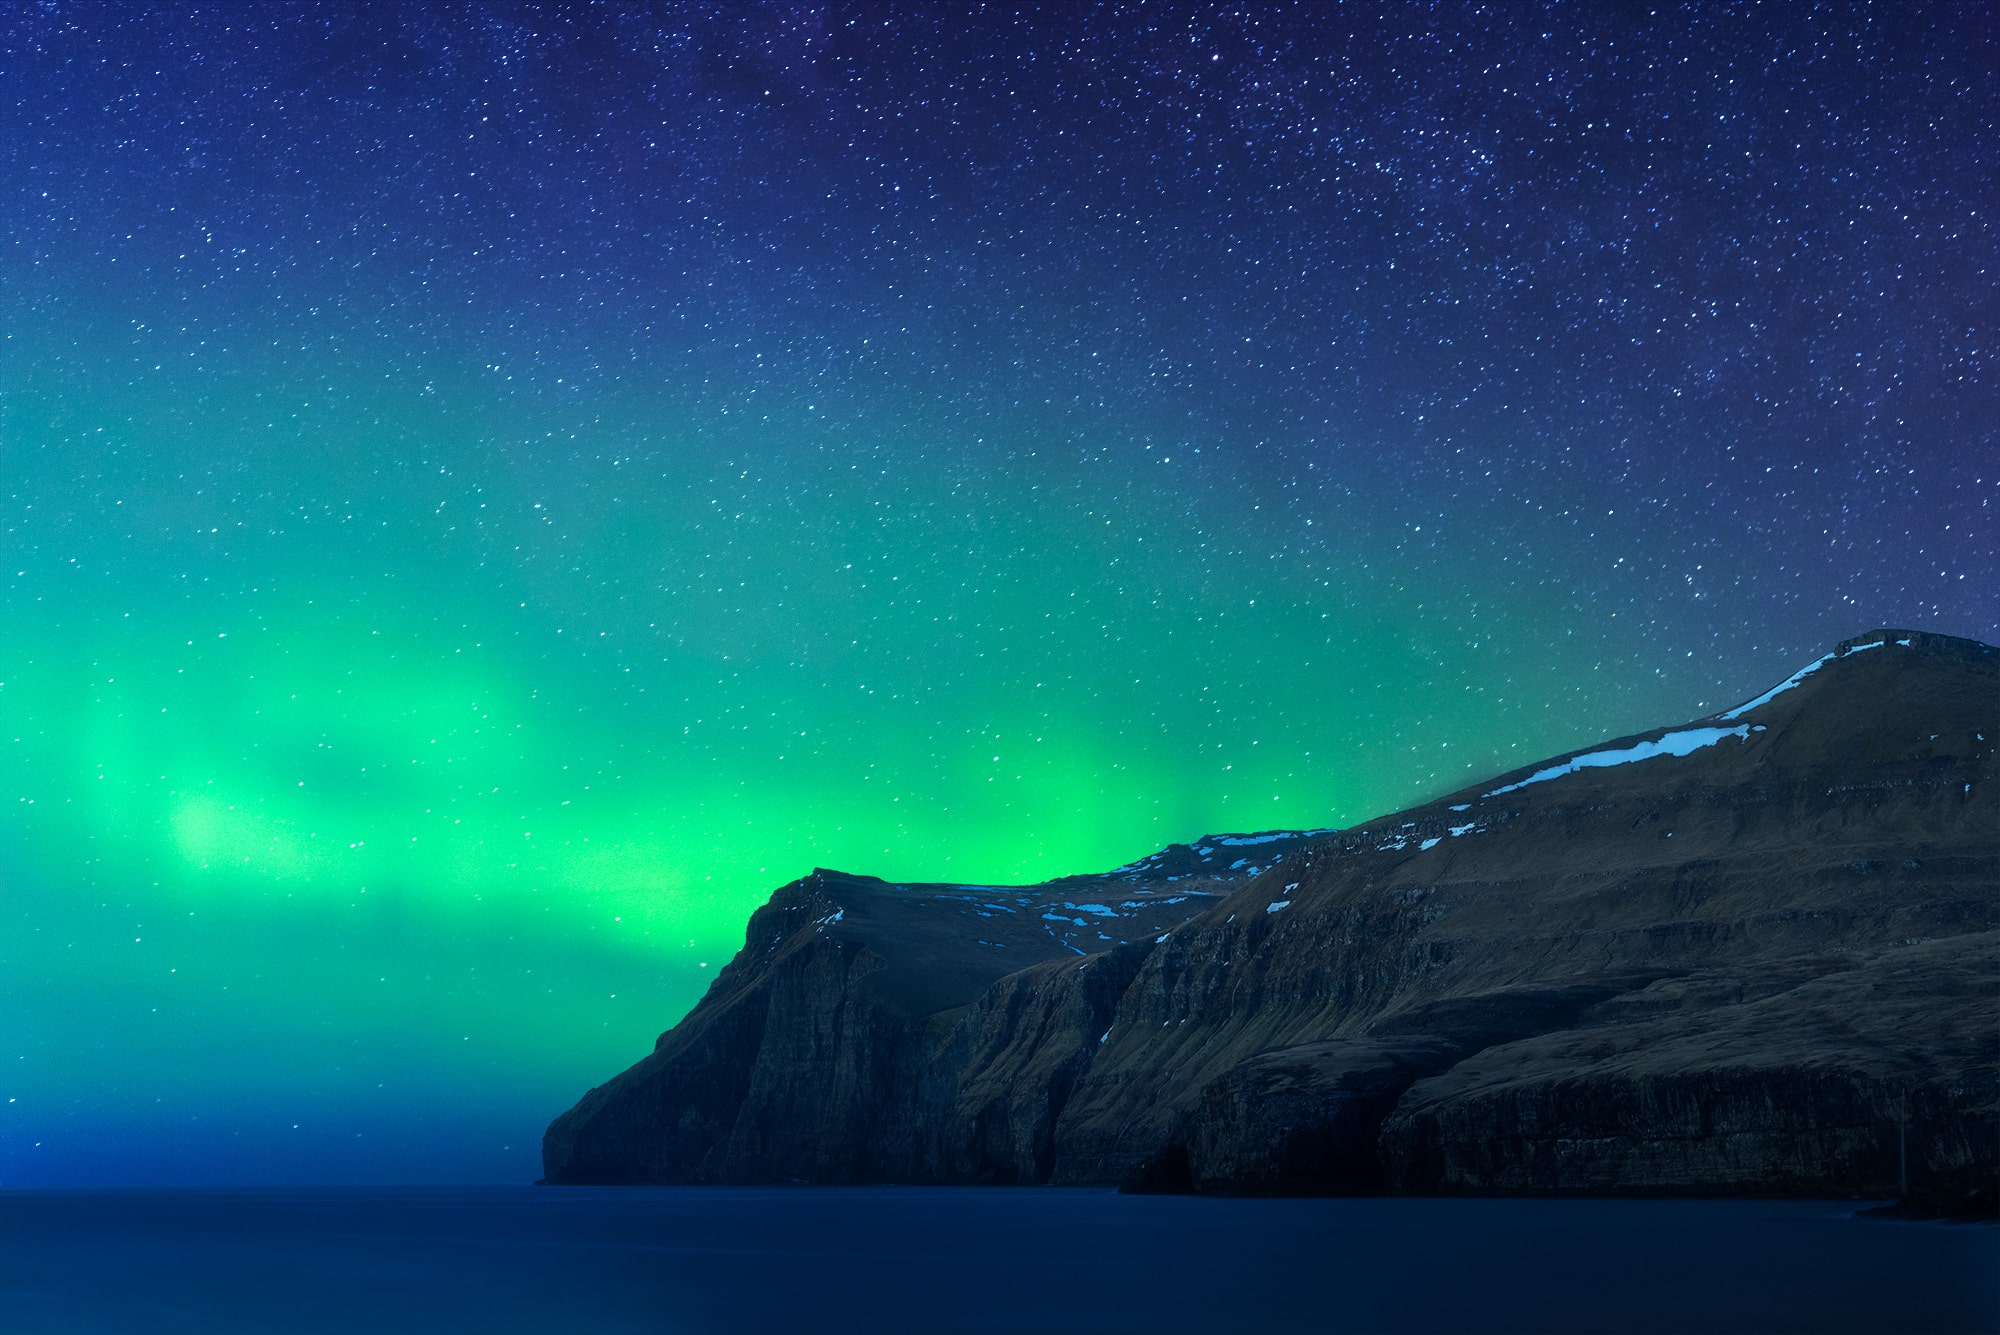 Experience the awe-inspiring beauty of astrophotography with this captivating image capturing the Aurora Borealis dancing above the sea, taken in the charming village of Eidi in the Faroe Islands. Witness the celestial spectacle as vibrant hues illuminate the night sky, painting a mesmerizing scene against the backdrop of the tranquil waters. Immerse yourself in the magic of the Northern Lights captured in this stunning composition.